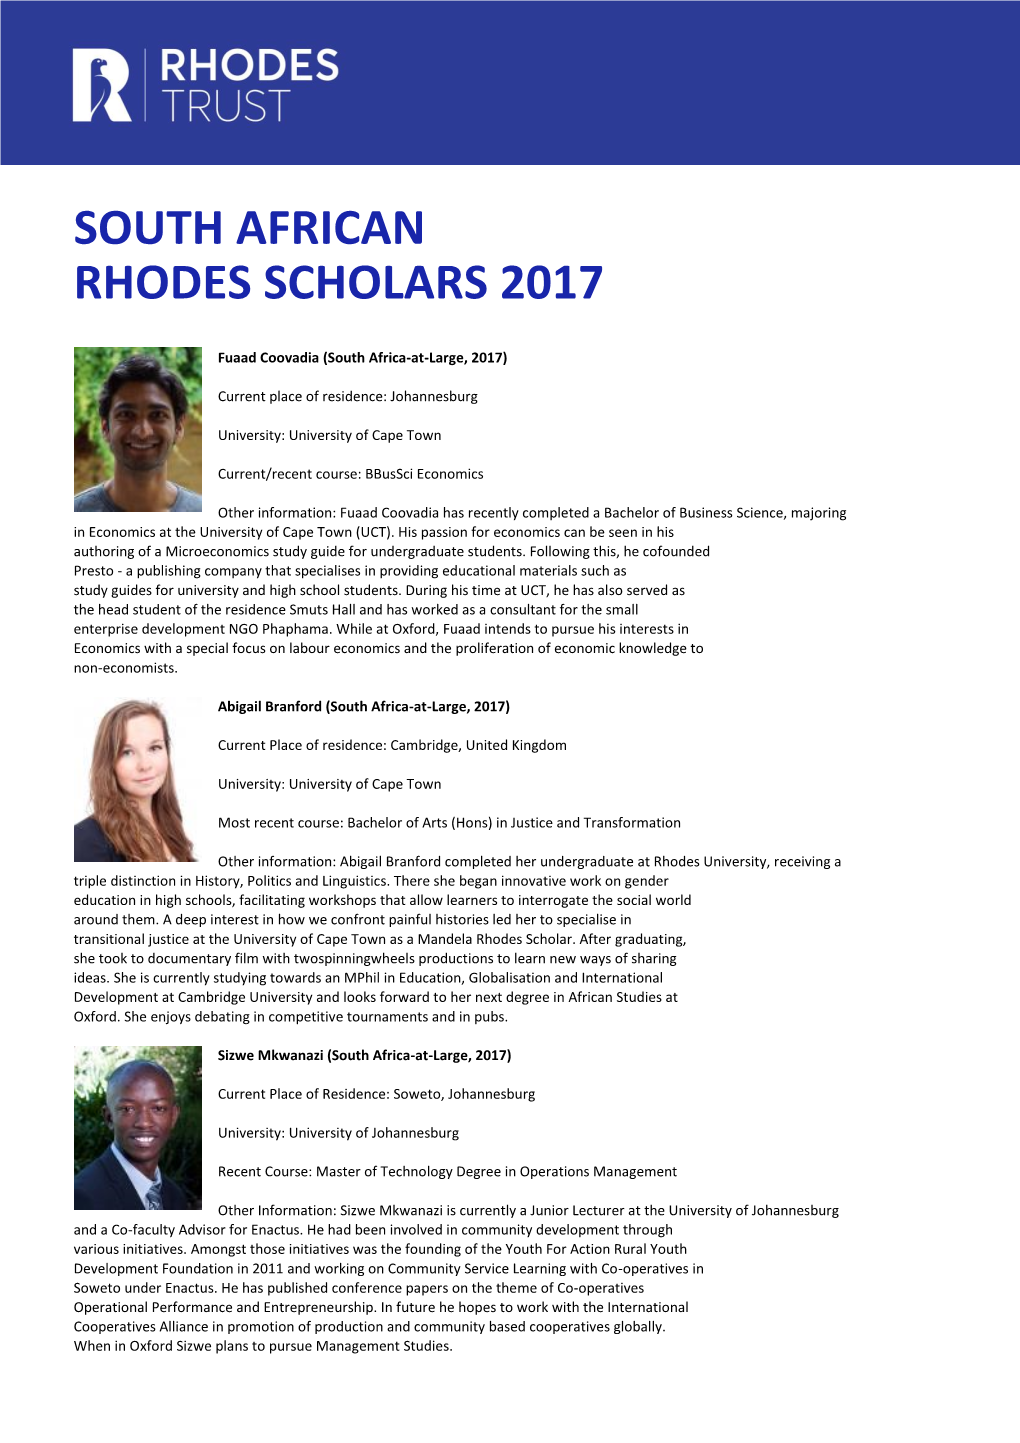 South African Rhodes Scholars 2017